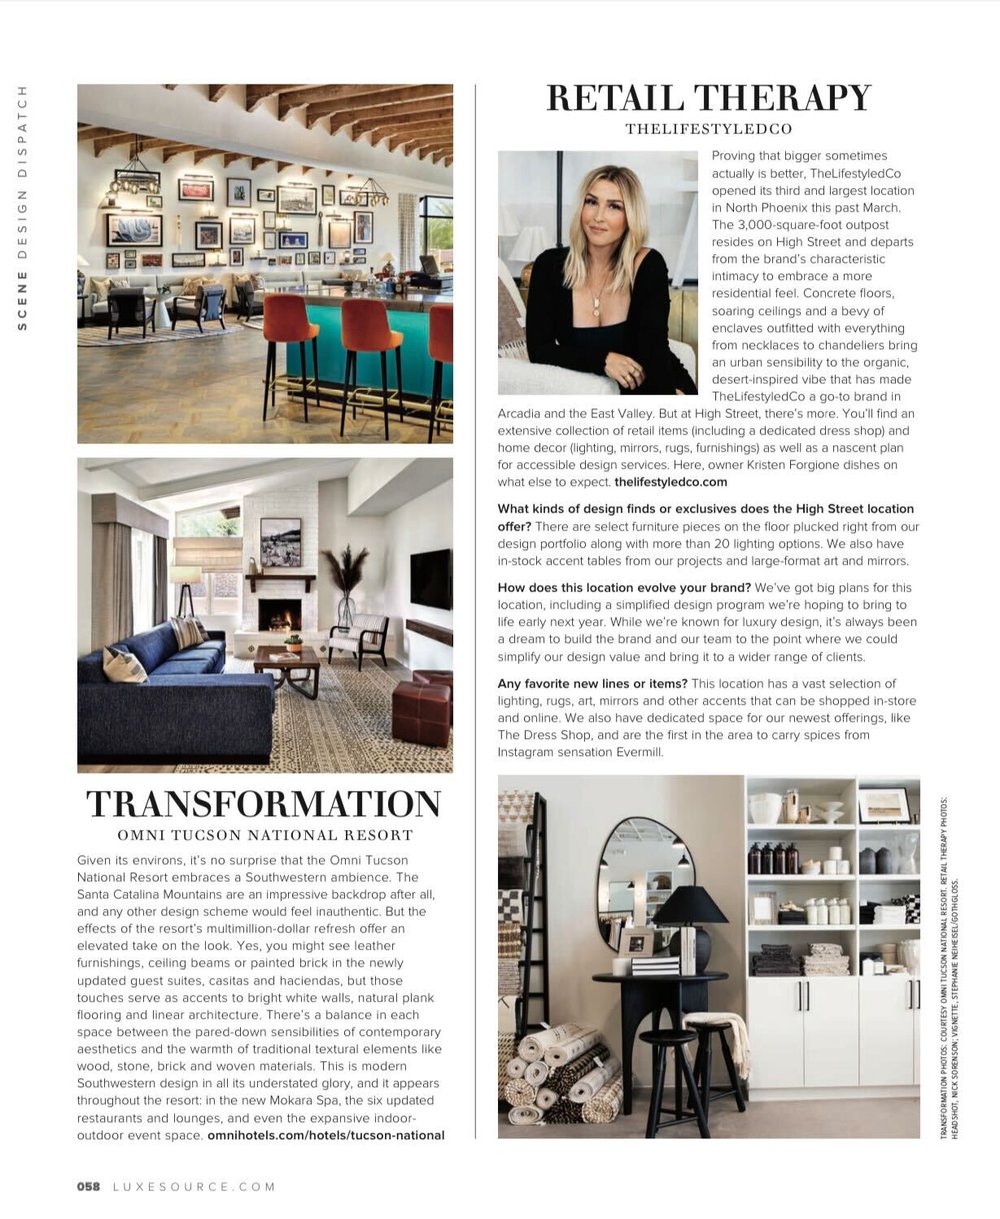  Snippet from “Luxe Interiors + Design” magazine featuring styled spaces in retail, restaurants, and hotels.  